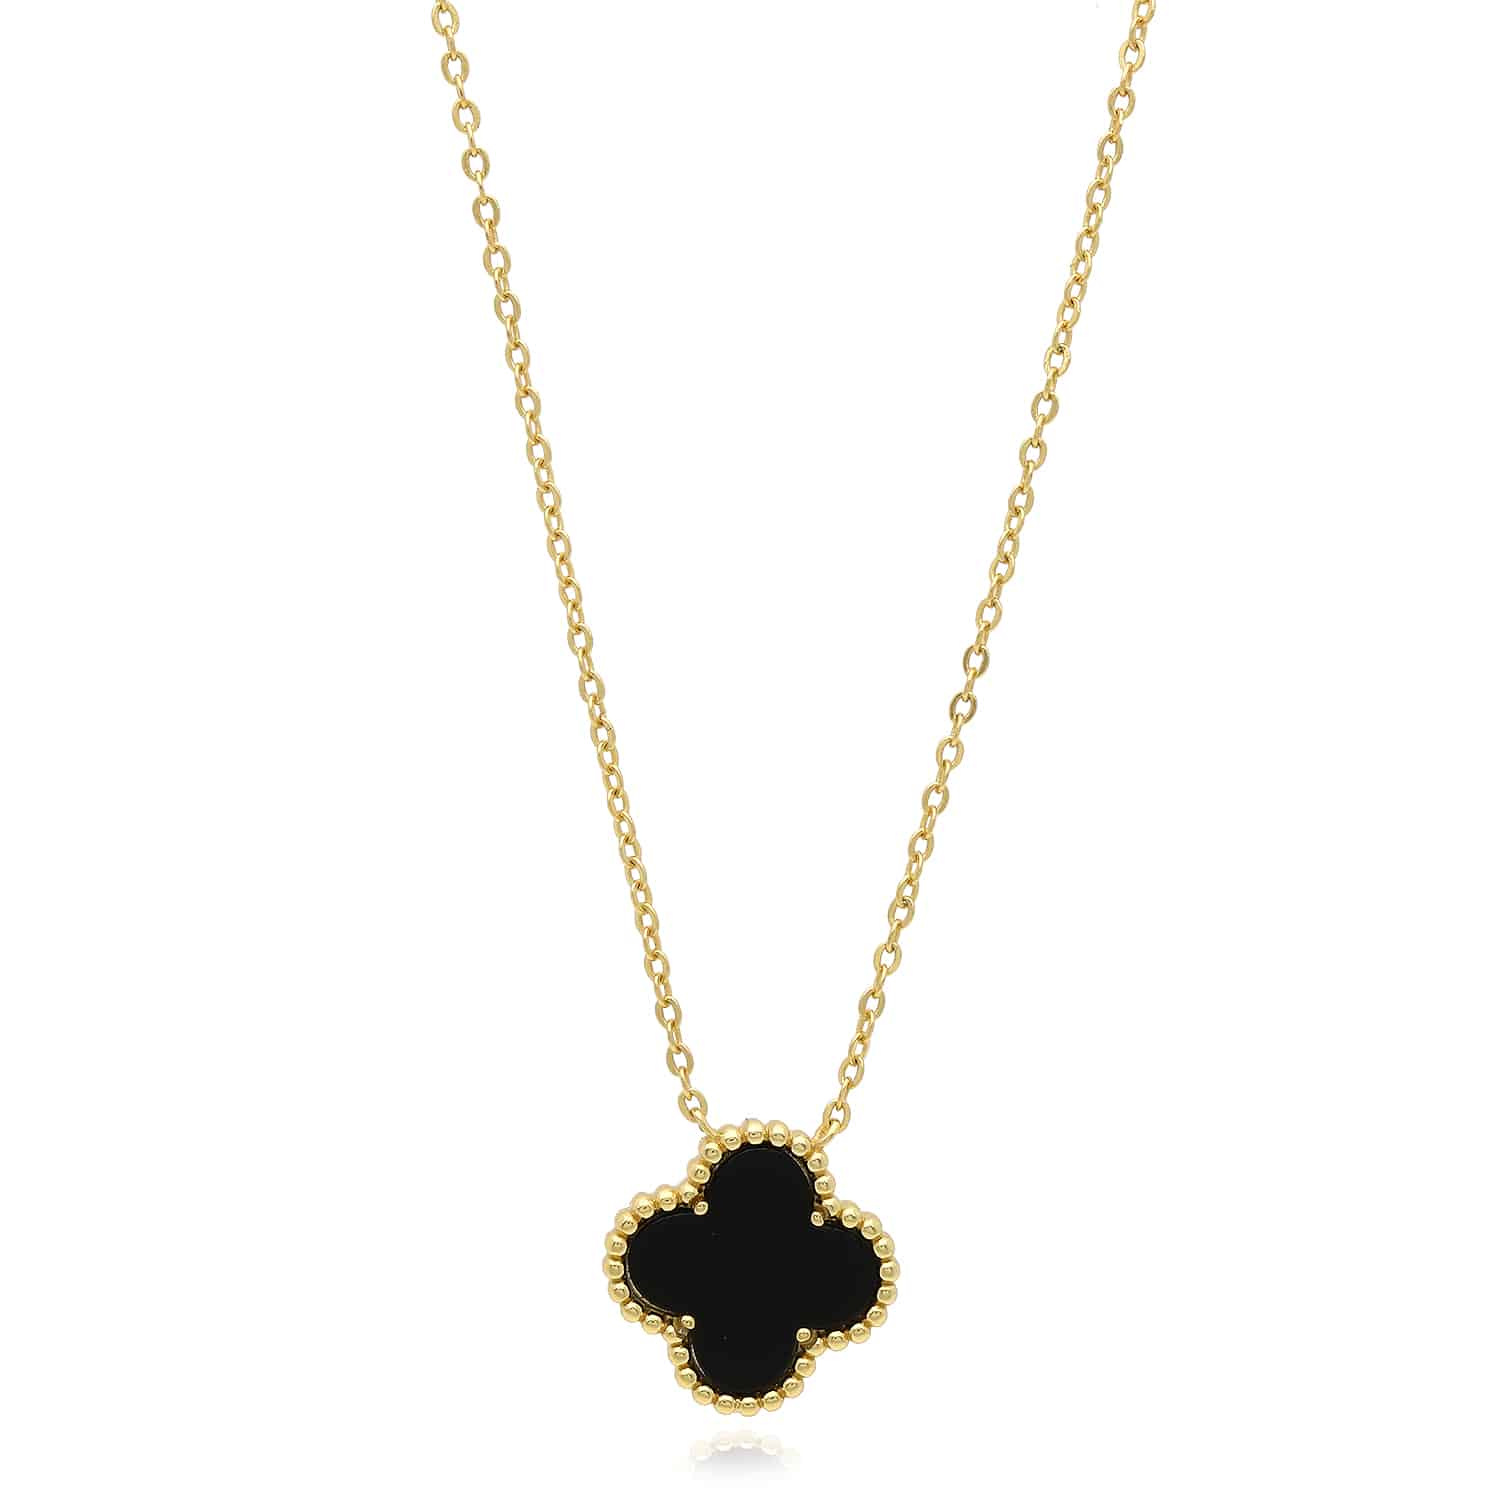 Yellow Gold Over Silver Gemstone Clover Leaf Pendant Necklace 16"-18" Adjustable - Onyx